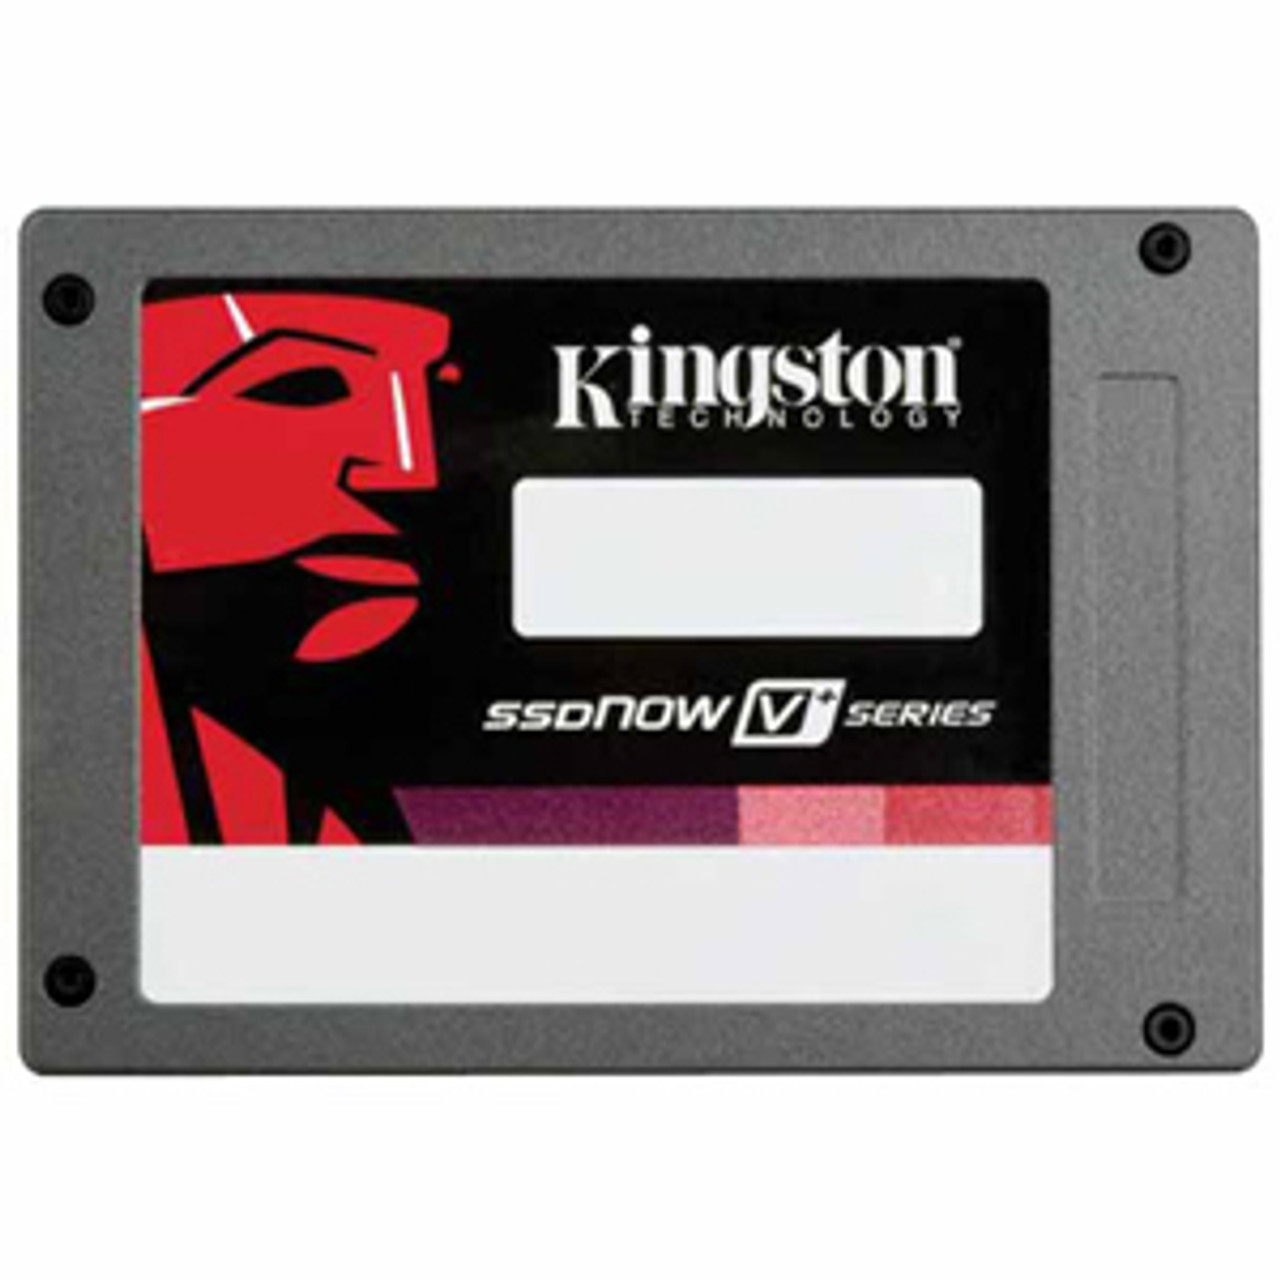 SNV225-S2/256GB - Kingston SSDNow 256 GB Internal Solid State Drive -  Pack - 2.5 - SATA/300 - Hot Swappable